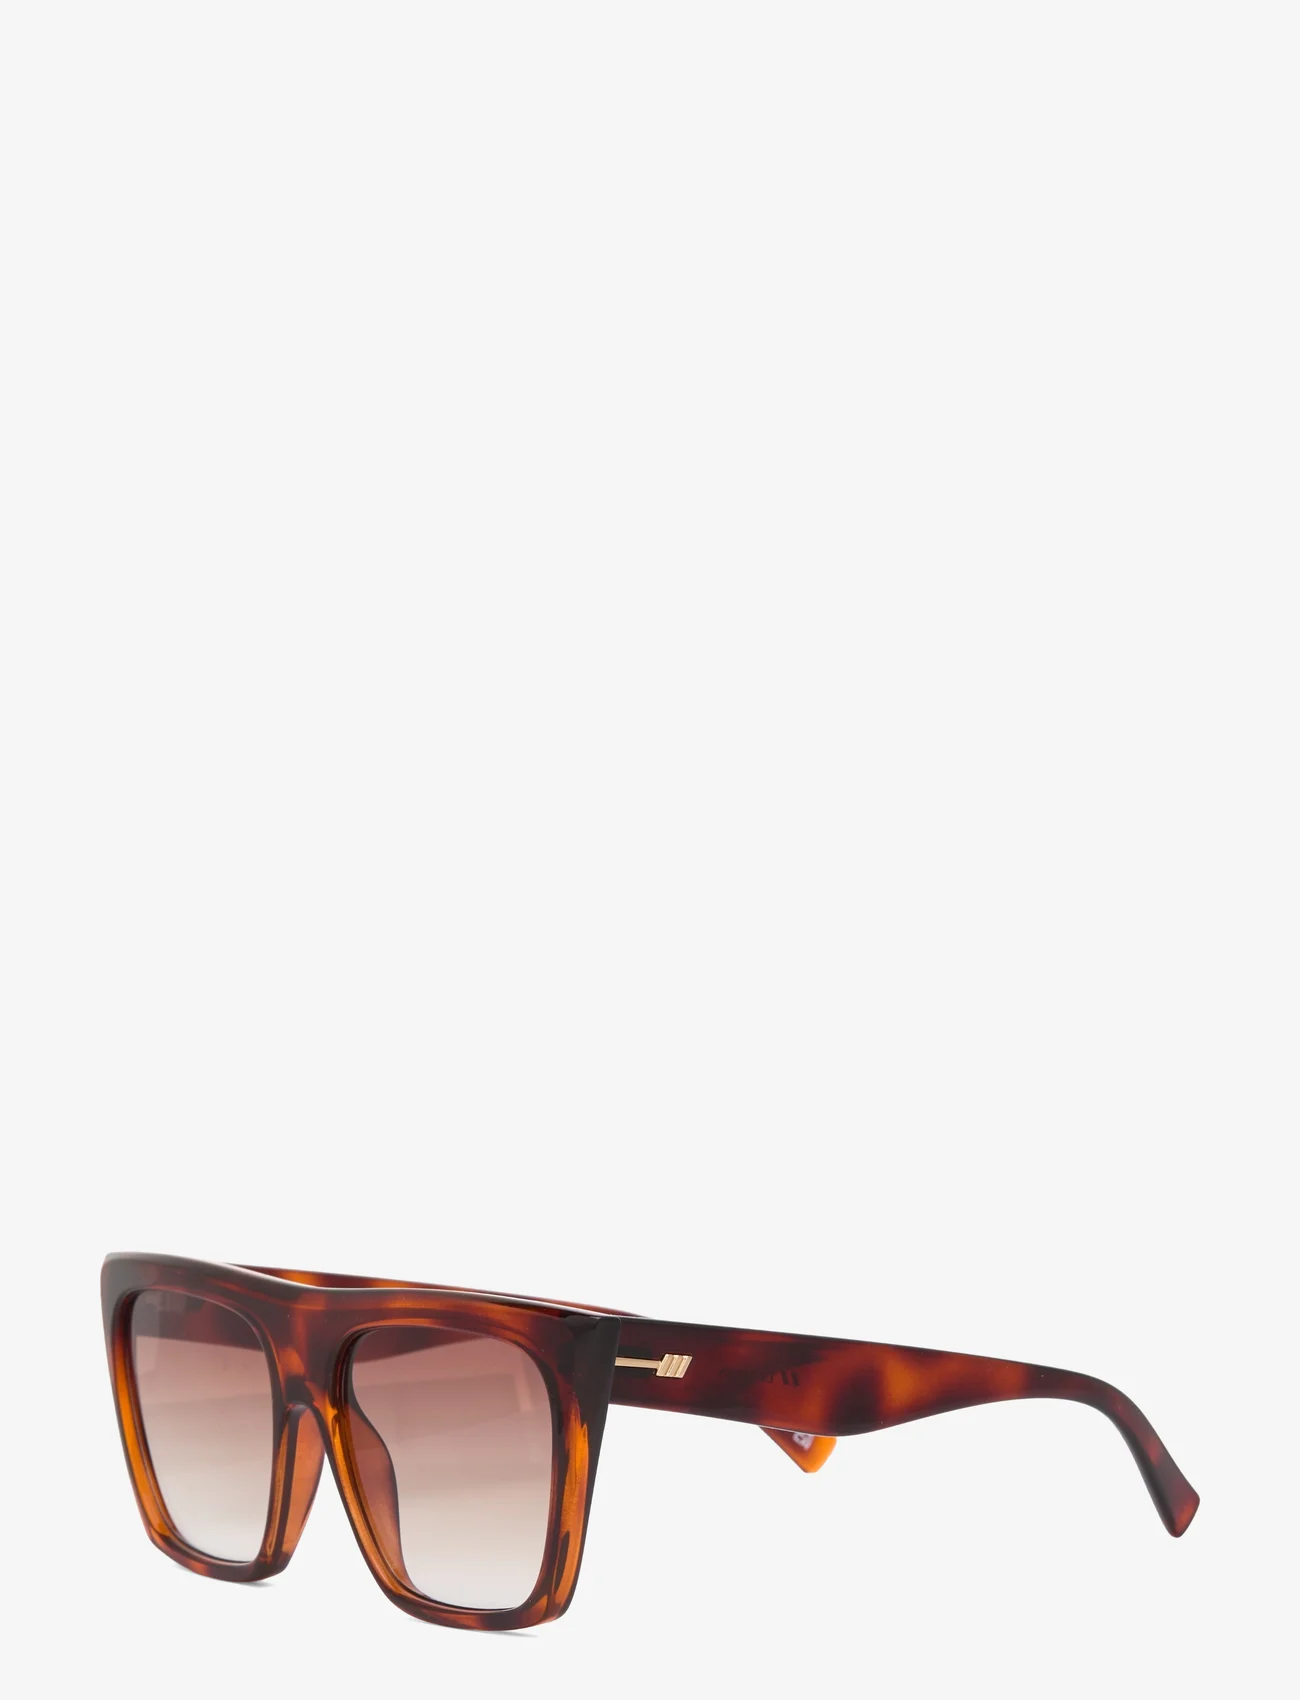 Le Specs - THE THIRST - d-form - toffee tort w/ brown grad lens - 1